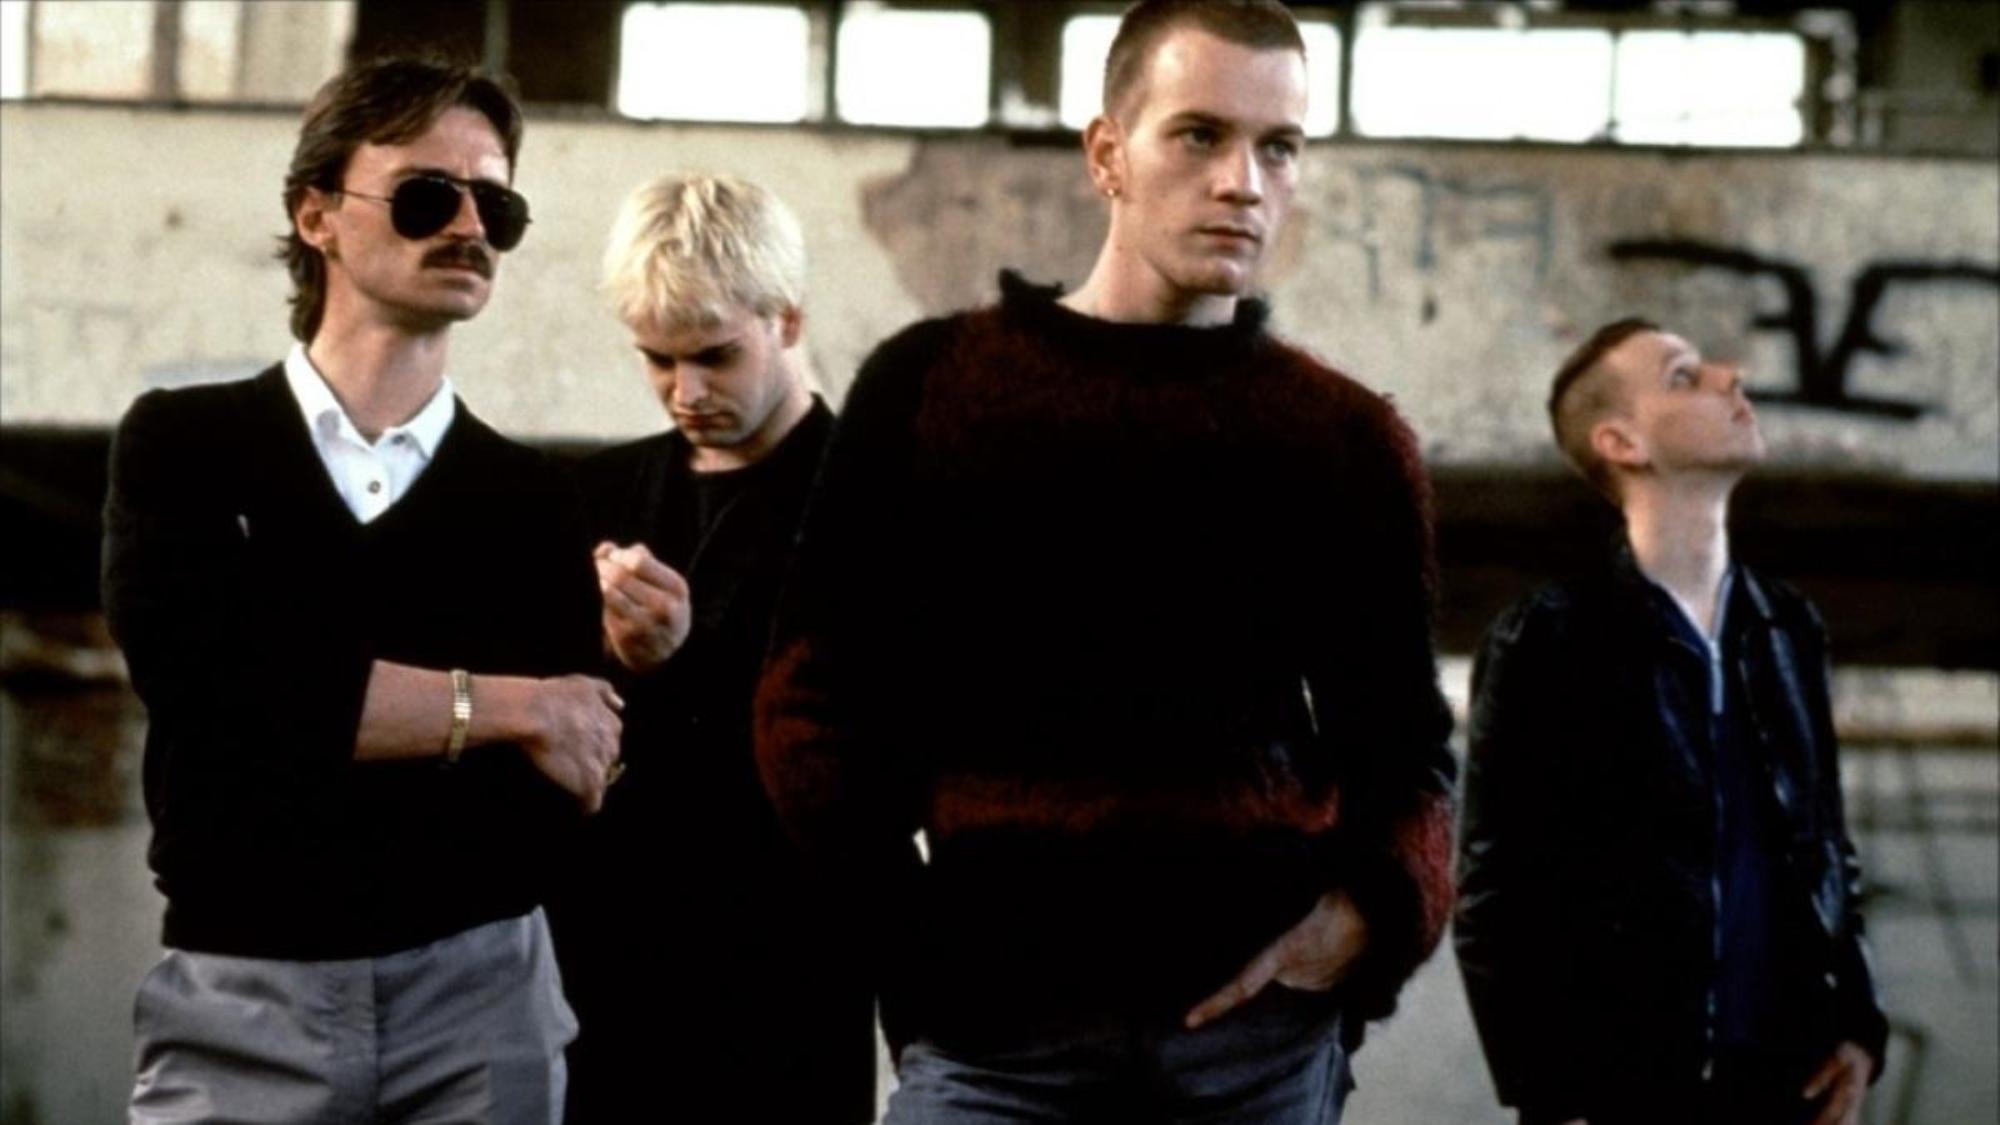 get-ready-for-a-trainspotting-sequel-1441638121